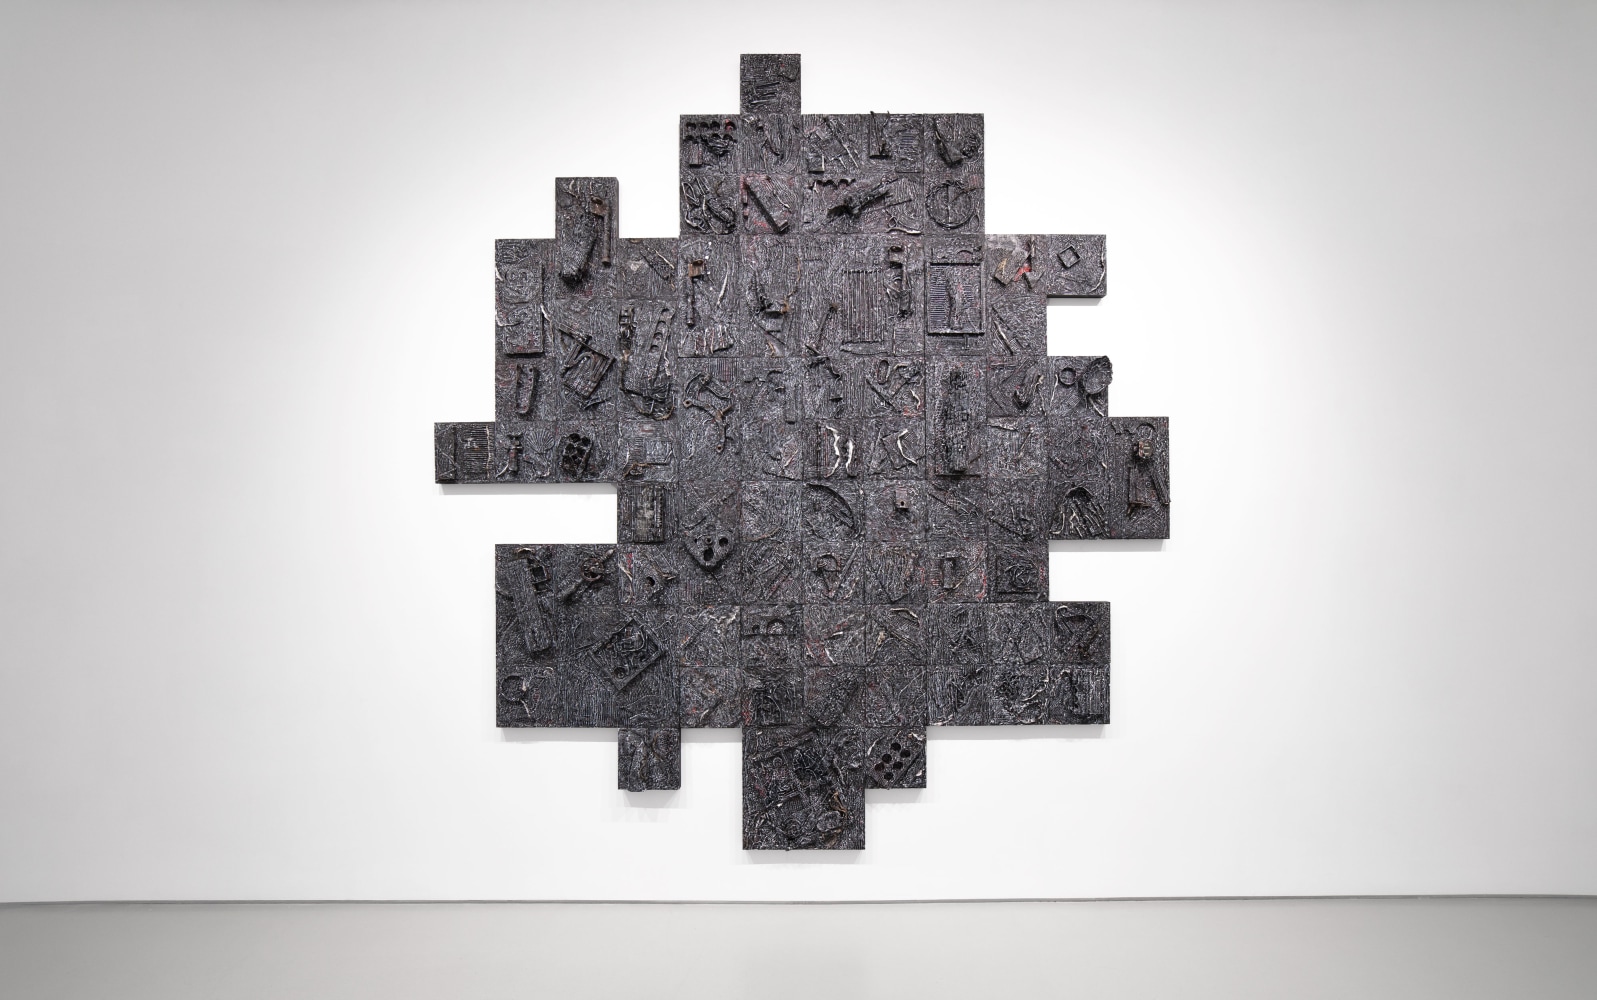 A dark, large scale, geometric artwork hung on white gallery wall.